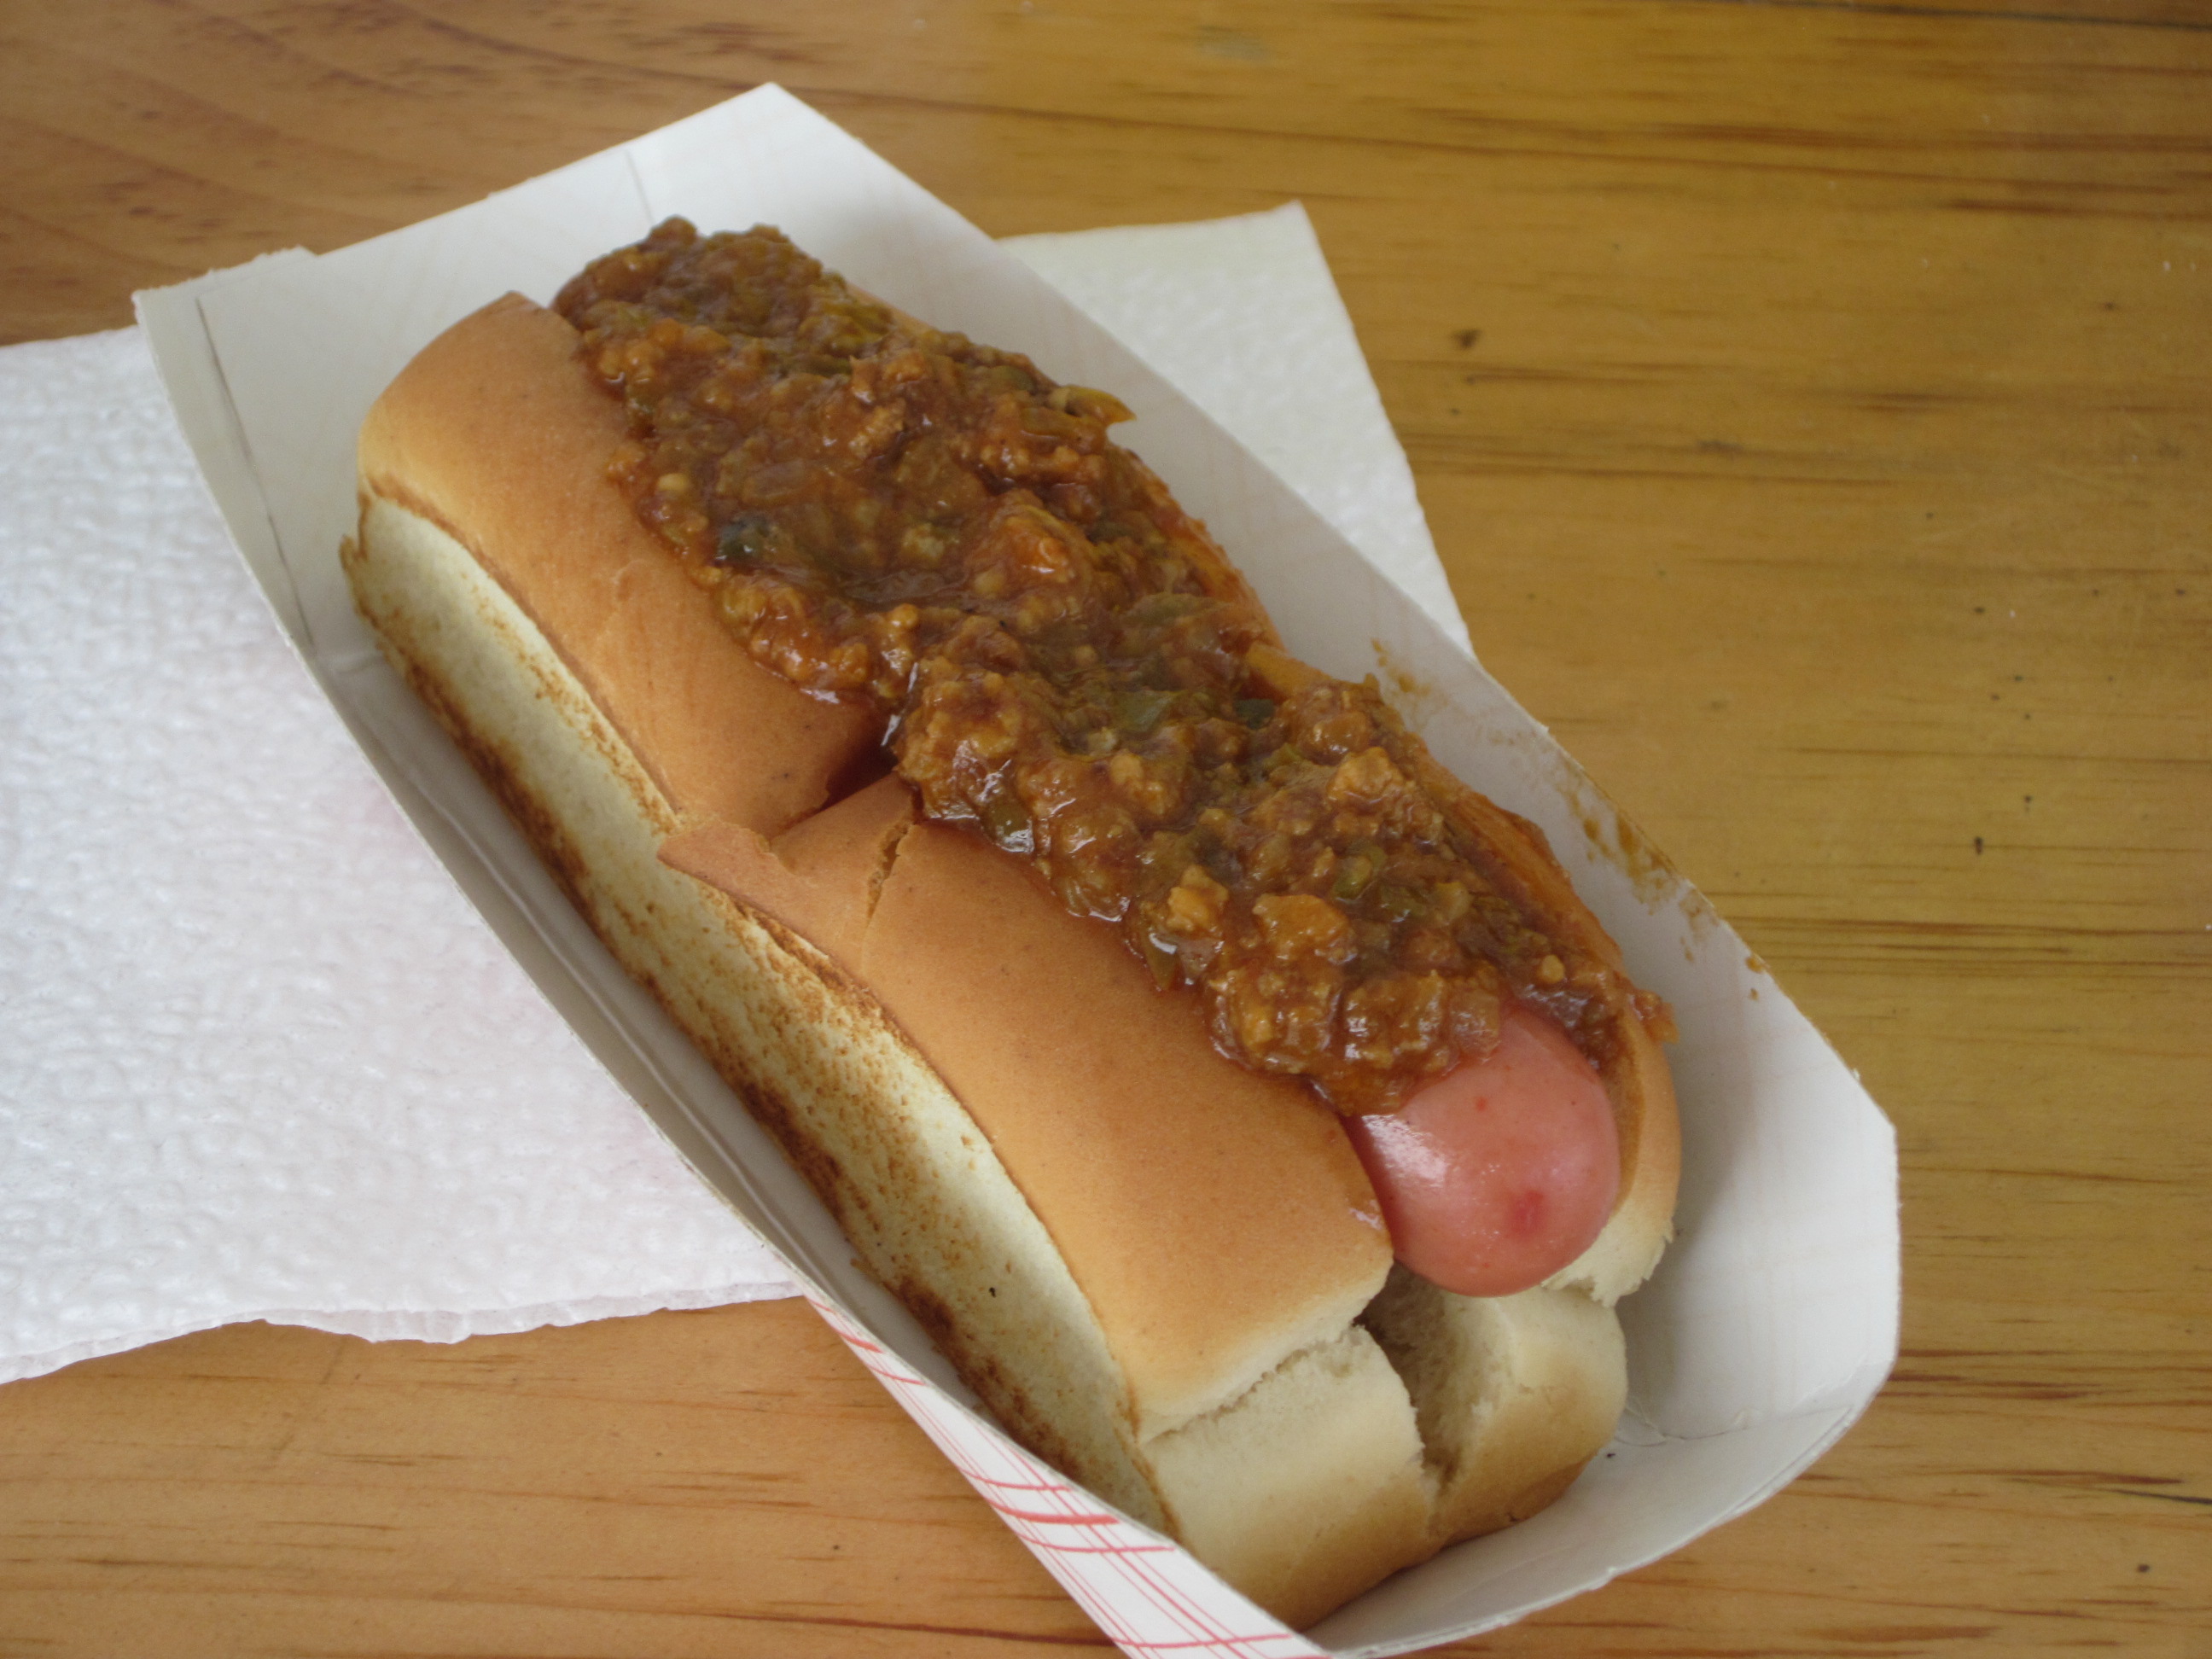 A Michigan Hot Dog from Top Dog, onions under